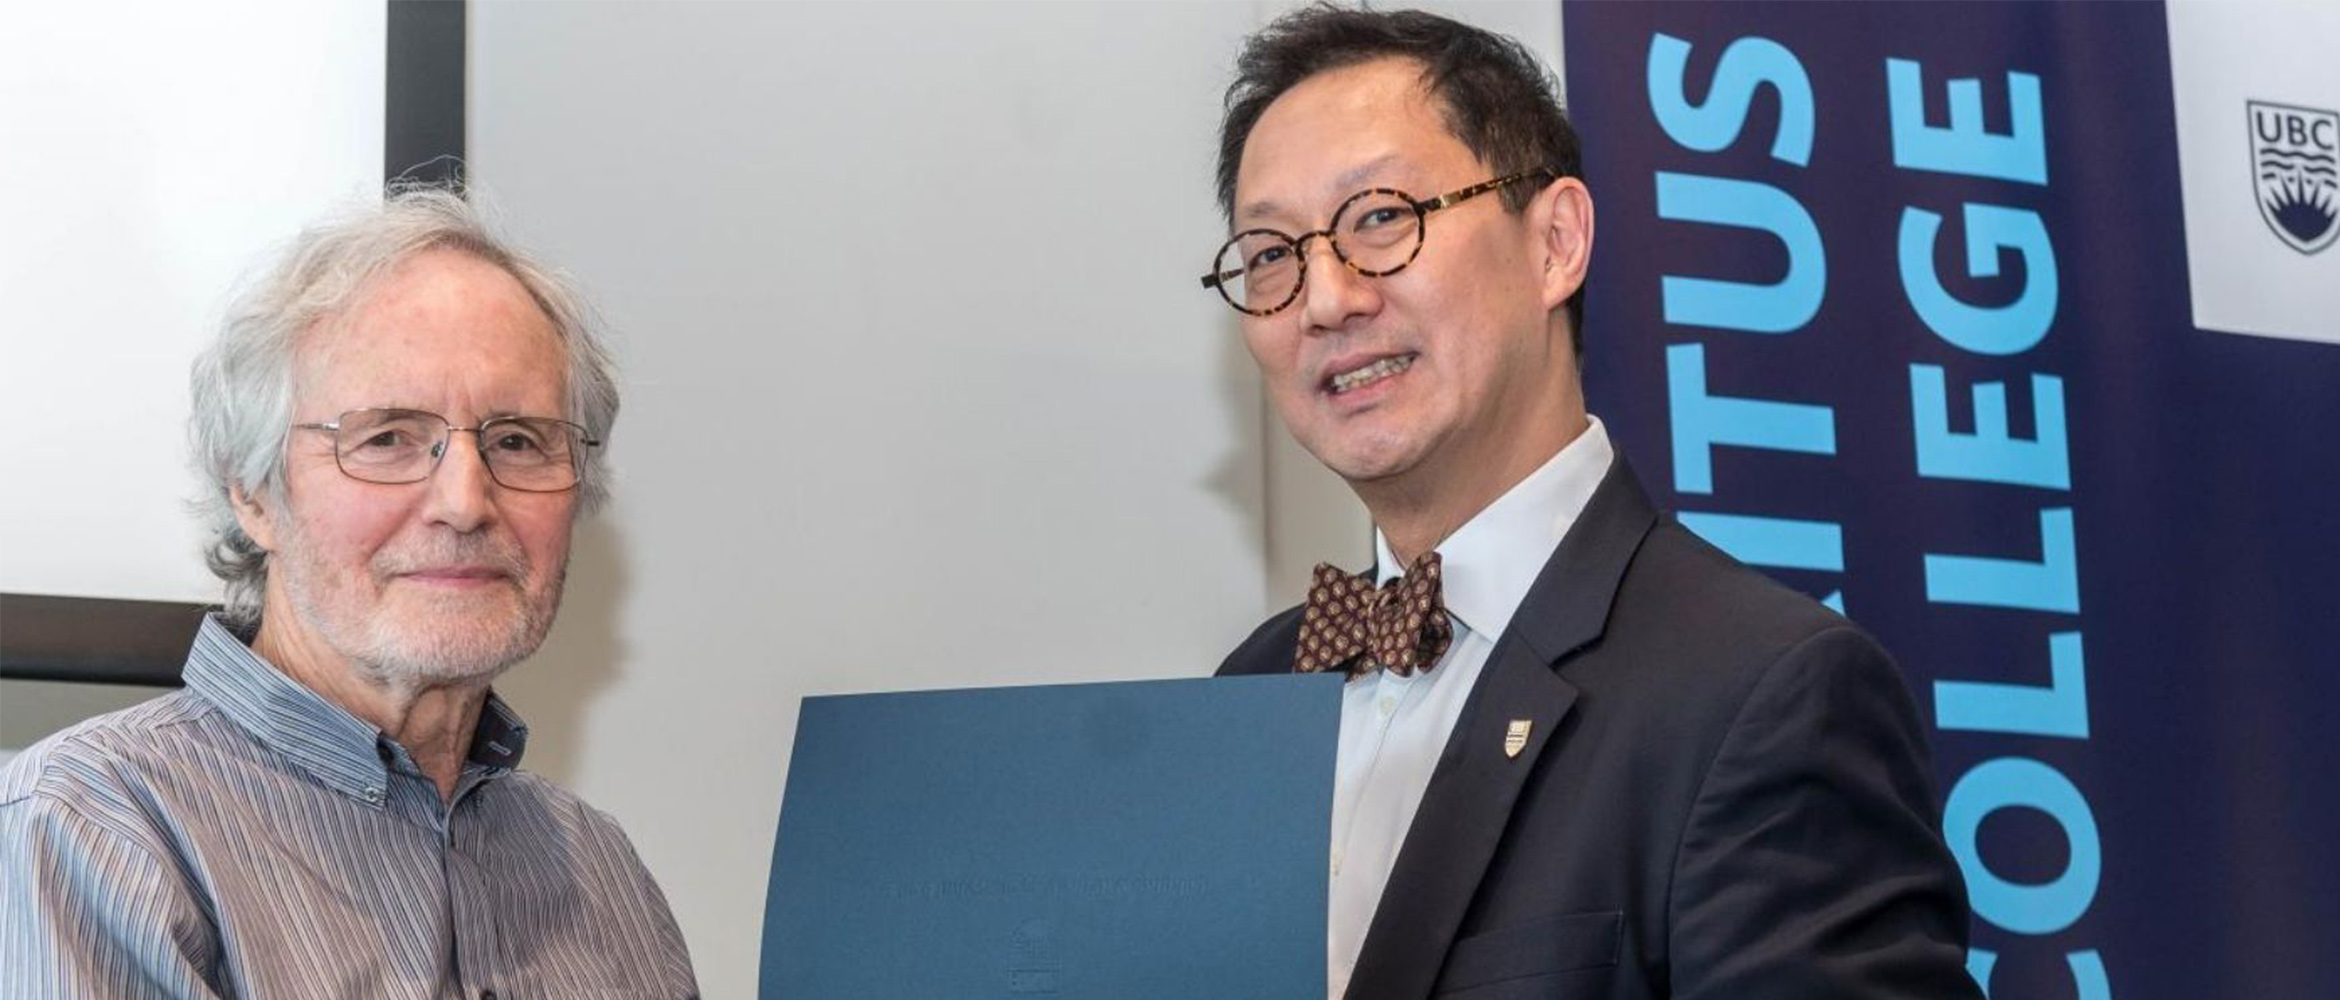 Dr. Peter Wing Receives UBC President’s Award